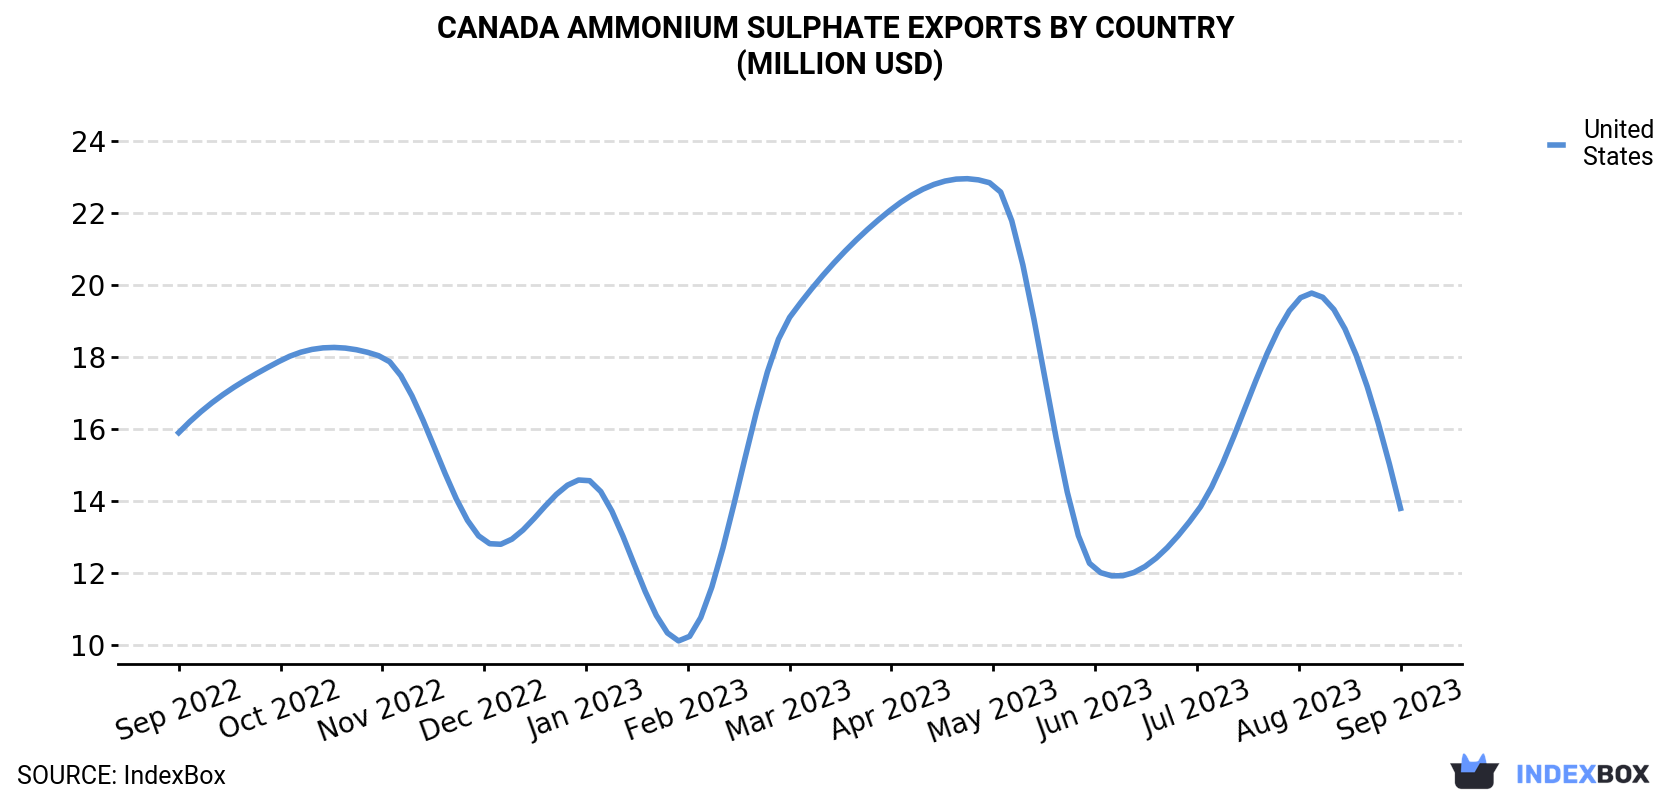 Canada Ammonium Sulphate Exports By Country (Million USD)